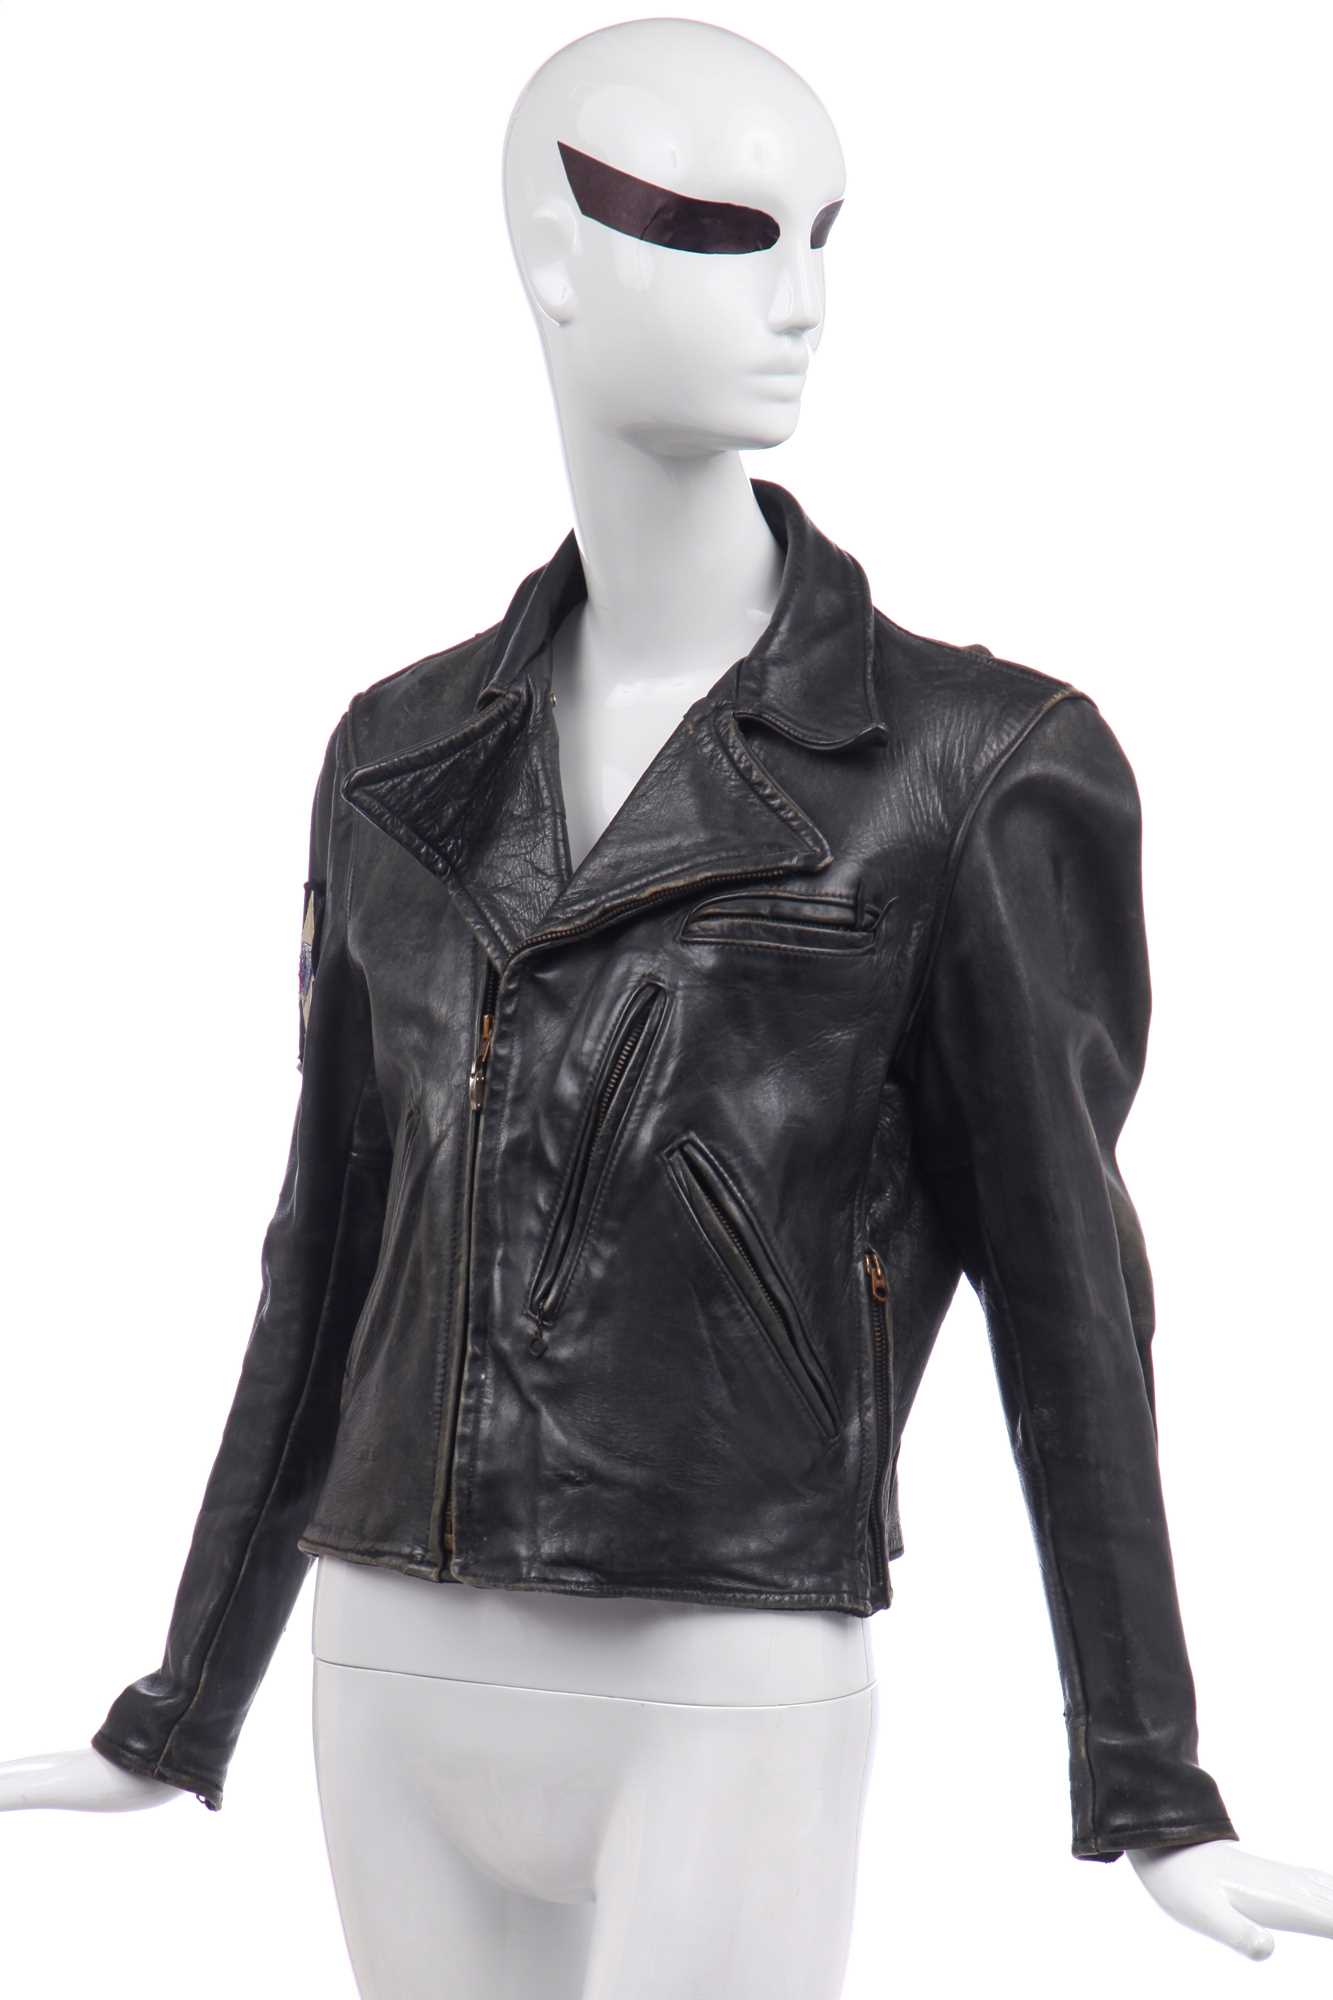 Lot 77 - Jordan's well-worn vintage black leather jacket with heart padlock attached to zip pull